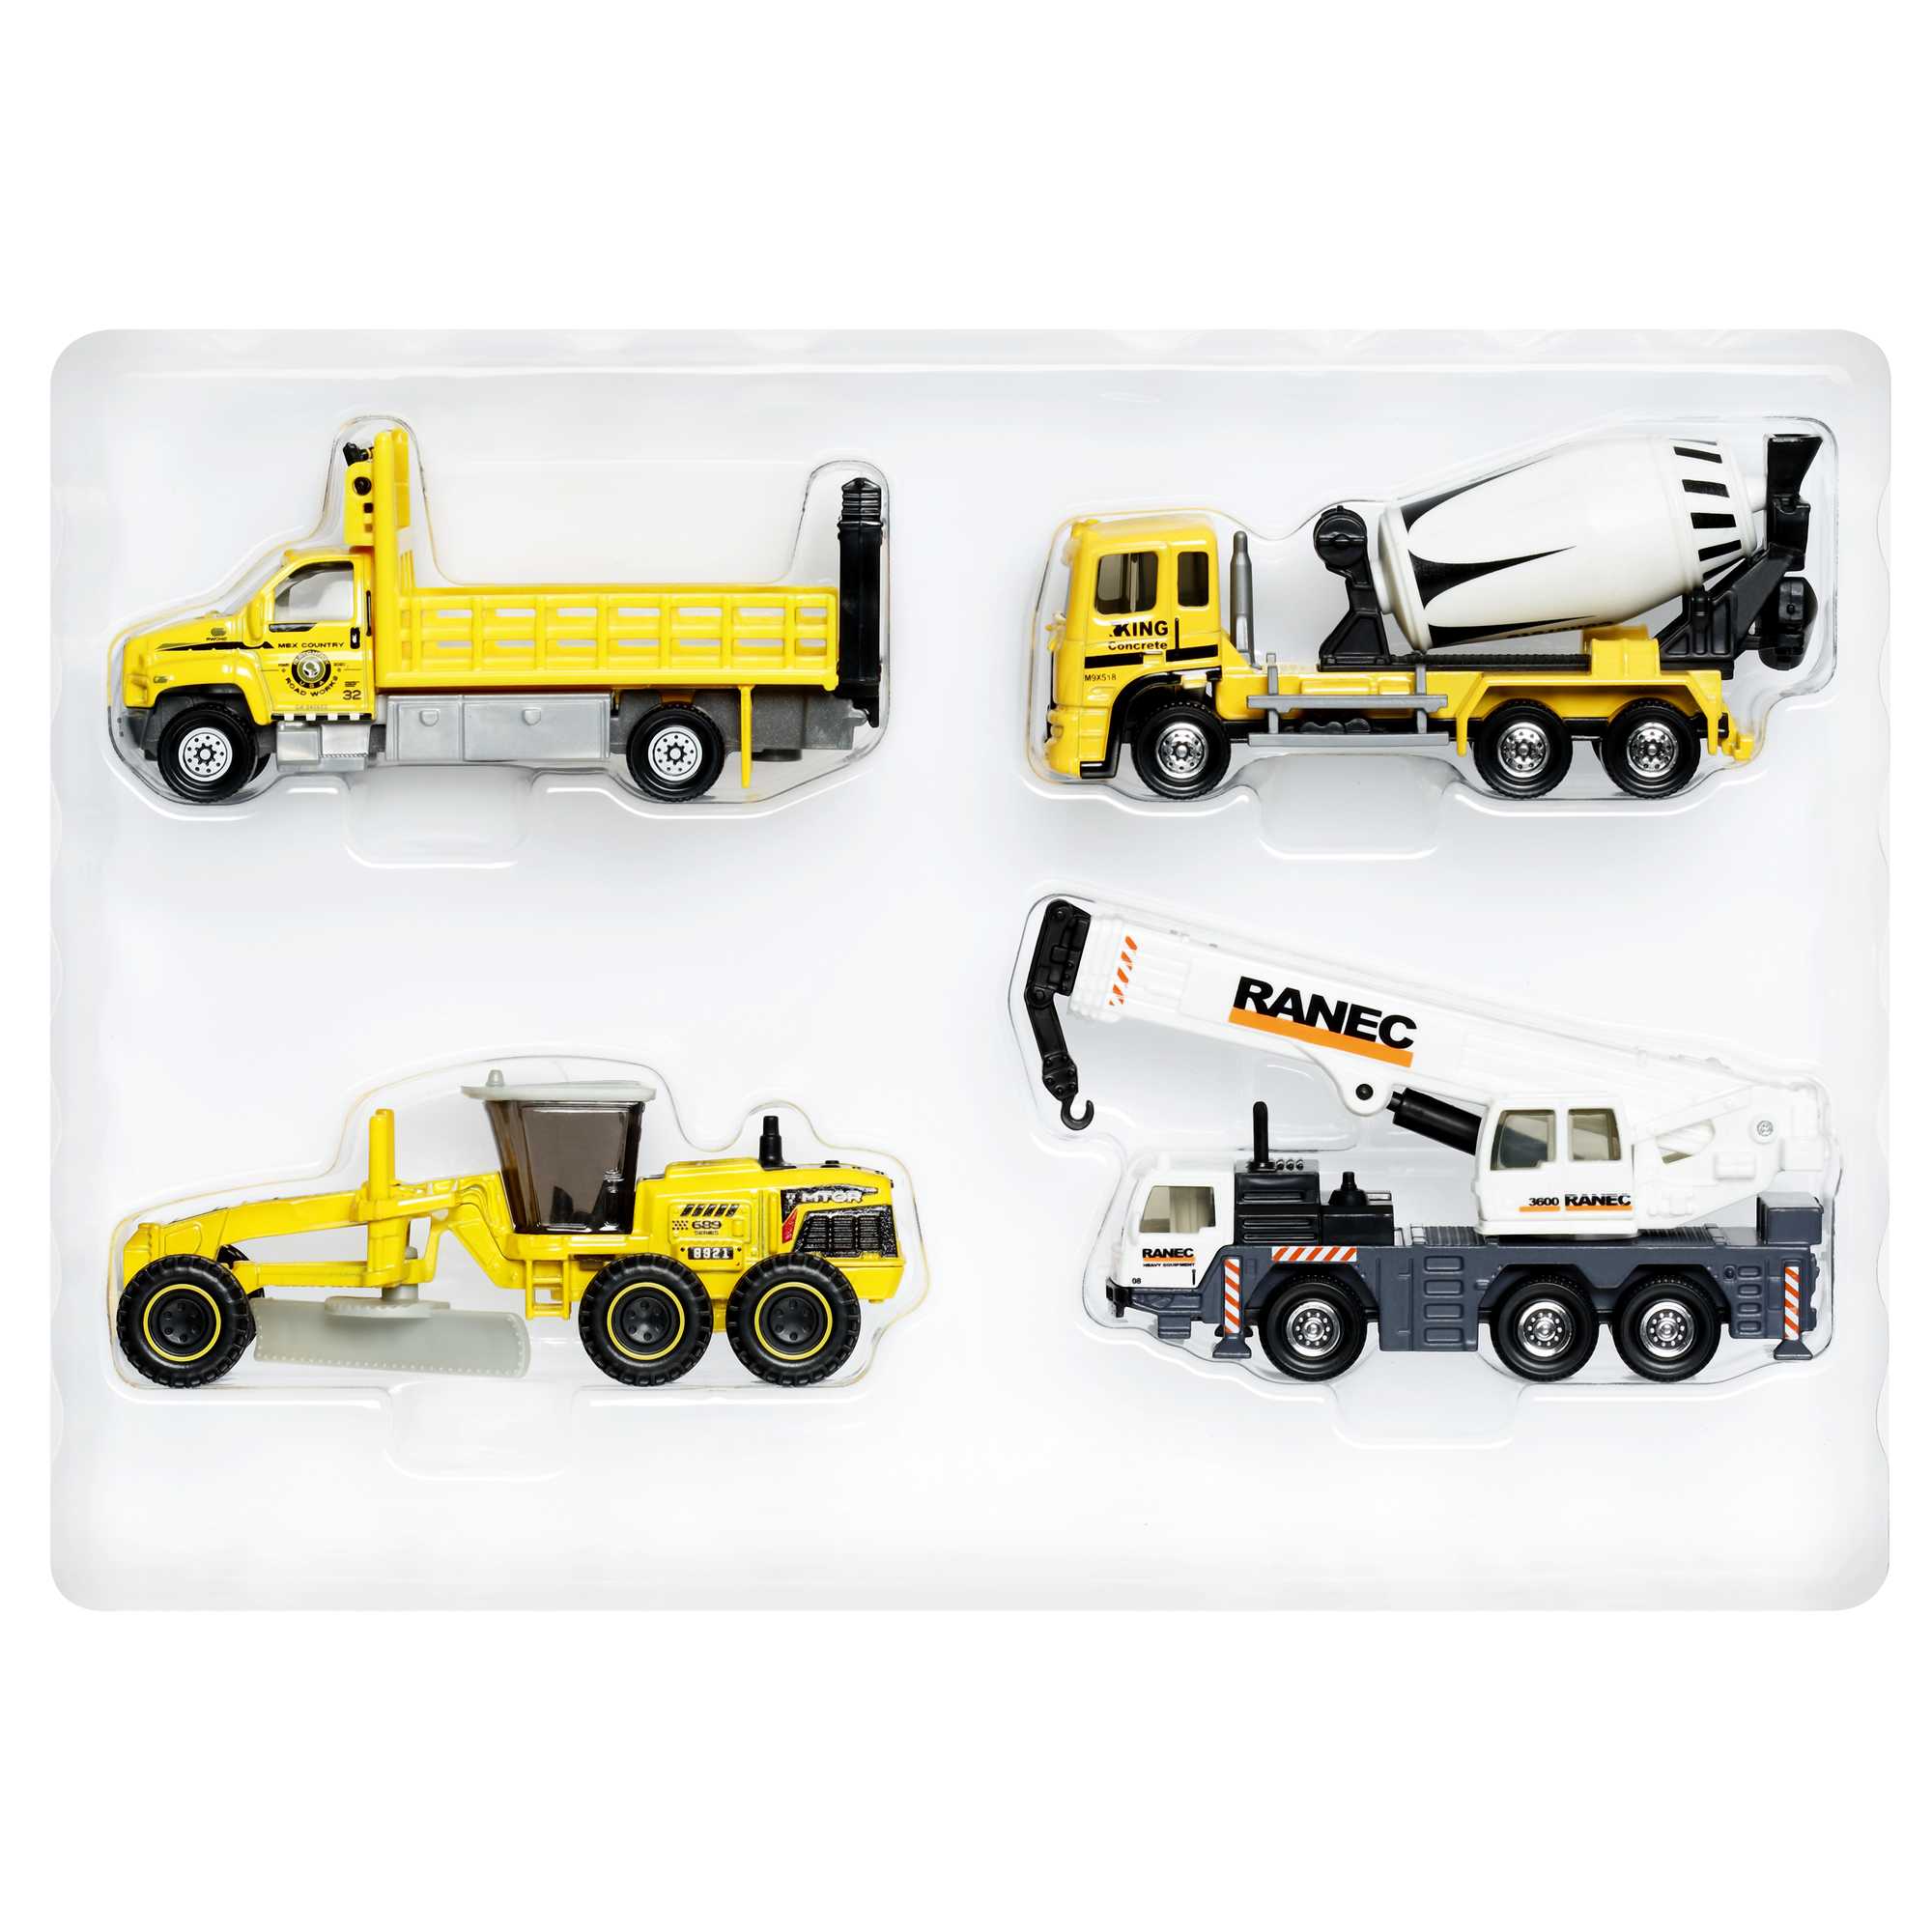 Matchbox Cars 9-Pack of 1:64 Scale Toy Construction Vehicles Multipack of  Trucks